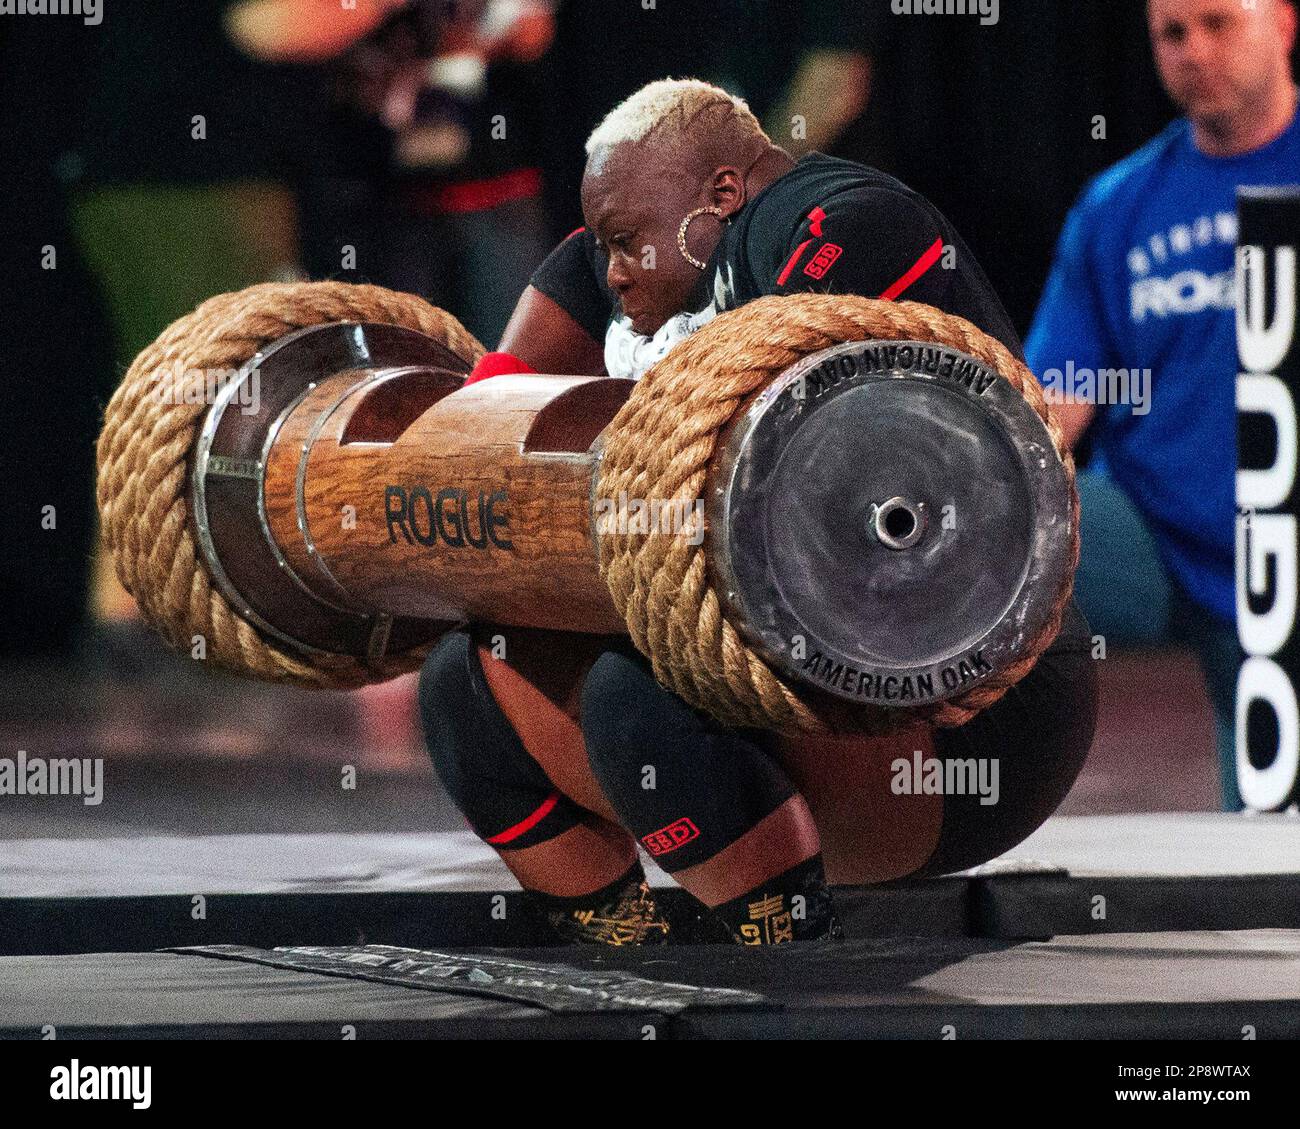 Columbus, Ohio, United States. 3th Mar, 2023. Tamara Walcott (USA) competes in the Austrian Oak Log Press at the Arnold Strongwoman Classic in Columbus, Ohio. Credit: Brent Clark/Alamy Live News Stock Photo